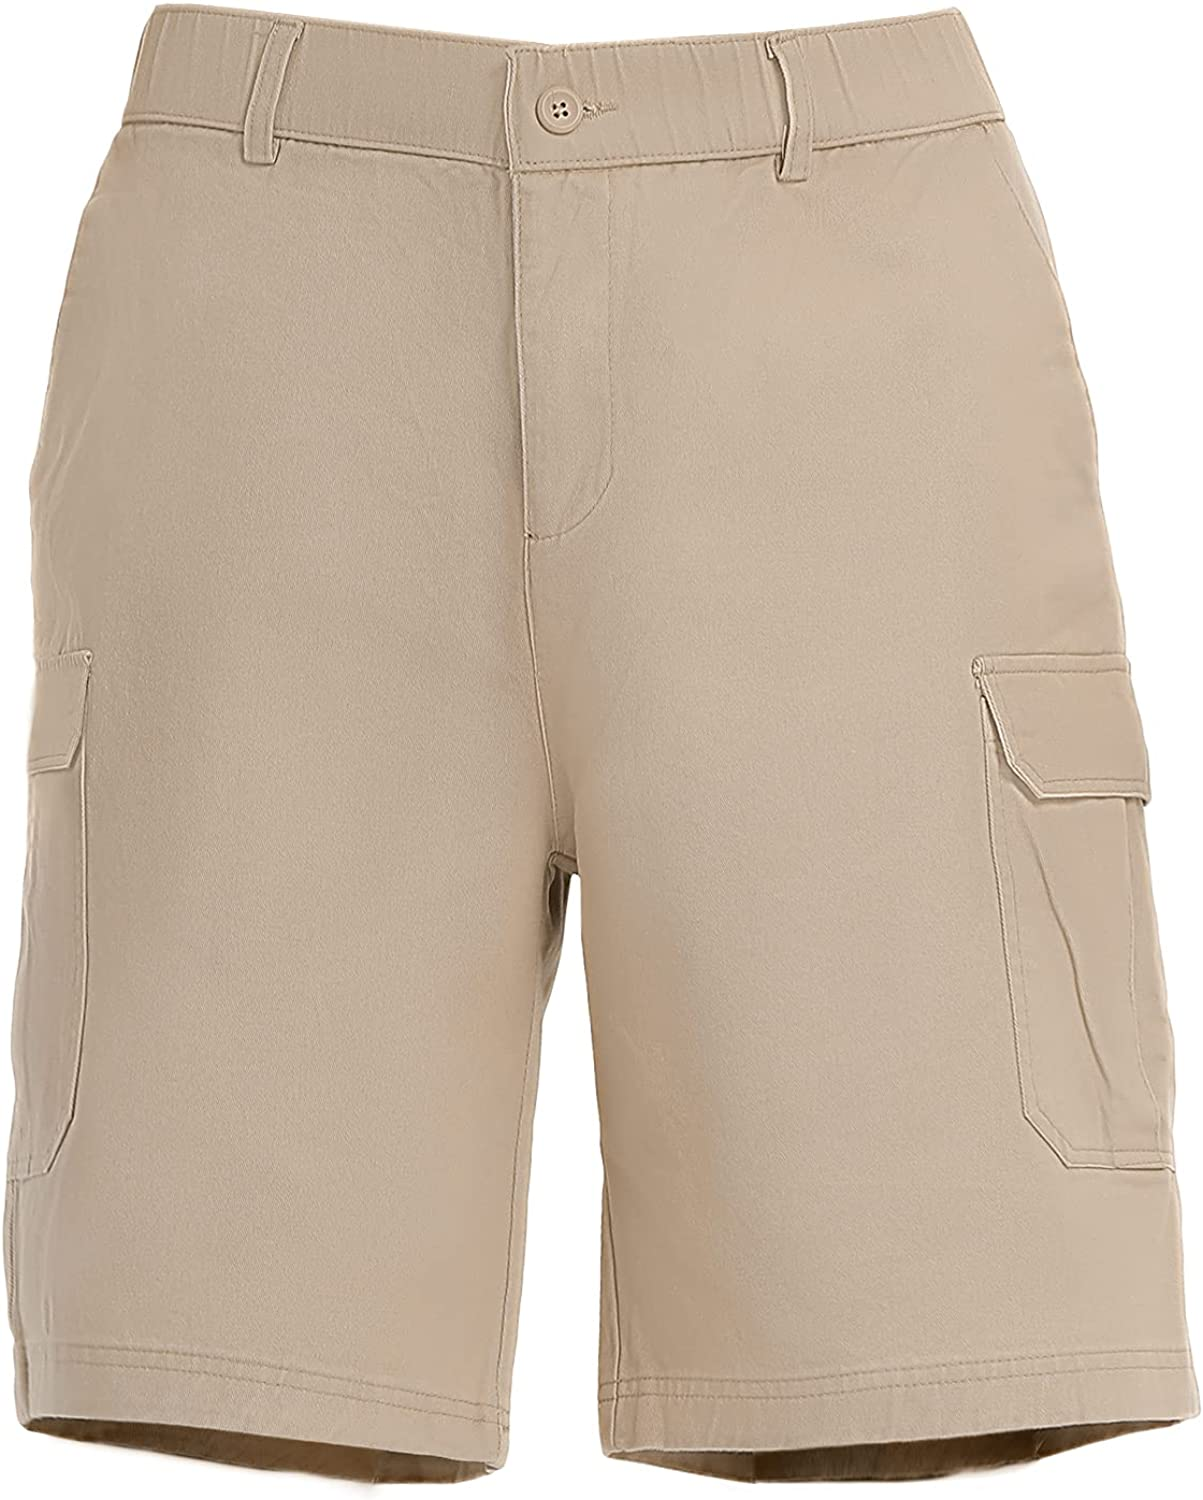 Men's Cotton Outdoor Casual Cargo Hiking Shorts with Relaxed Waist Fit